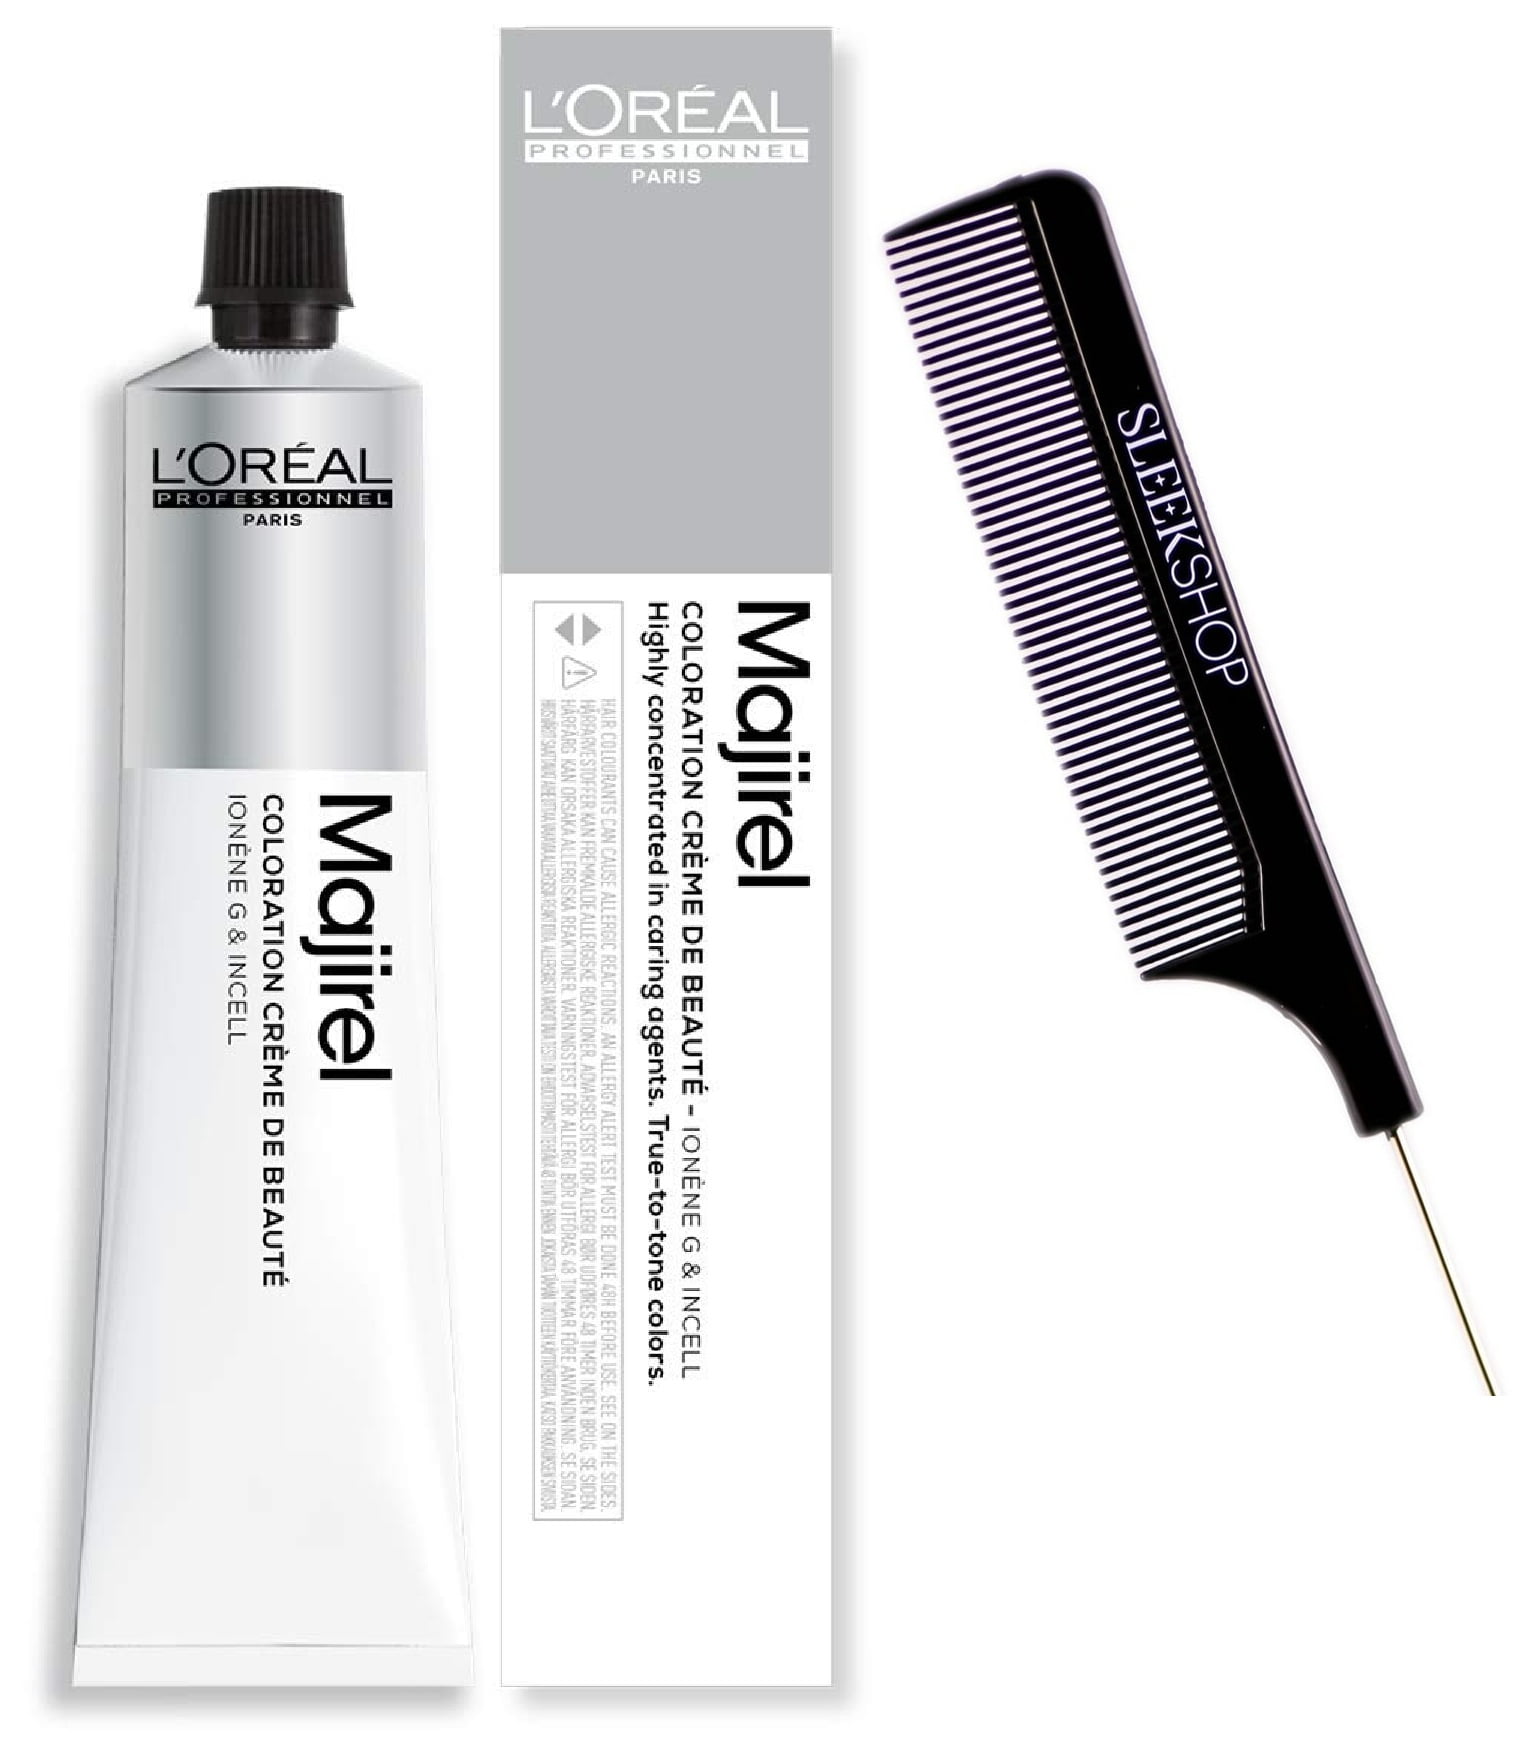 High Lift - Neutral N , L'oreal MAJIREL Professional Cream Permanent Hair  Color Dye Haircolor Ionene G & Incell Loreal - Pack of 3 w/ Sleek Pin Comb  